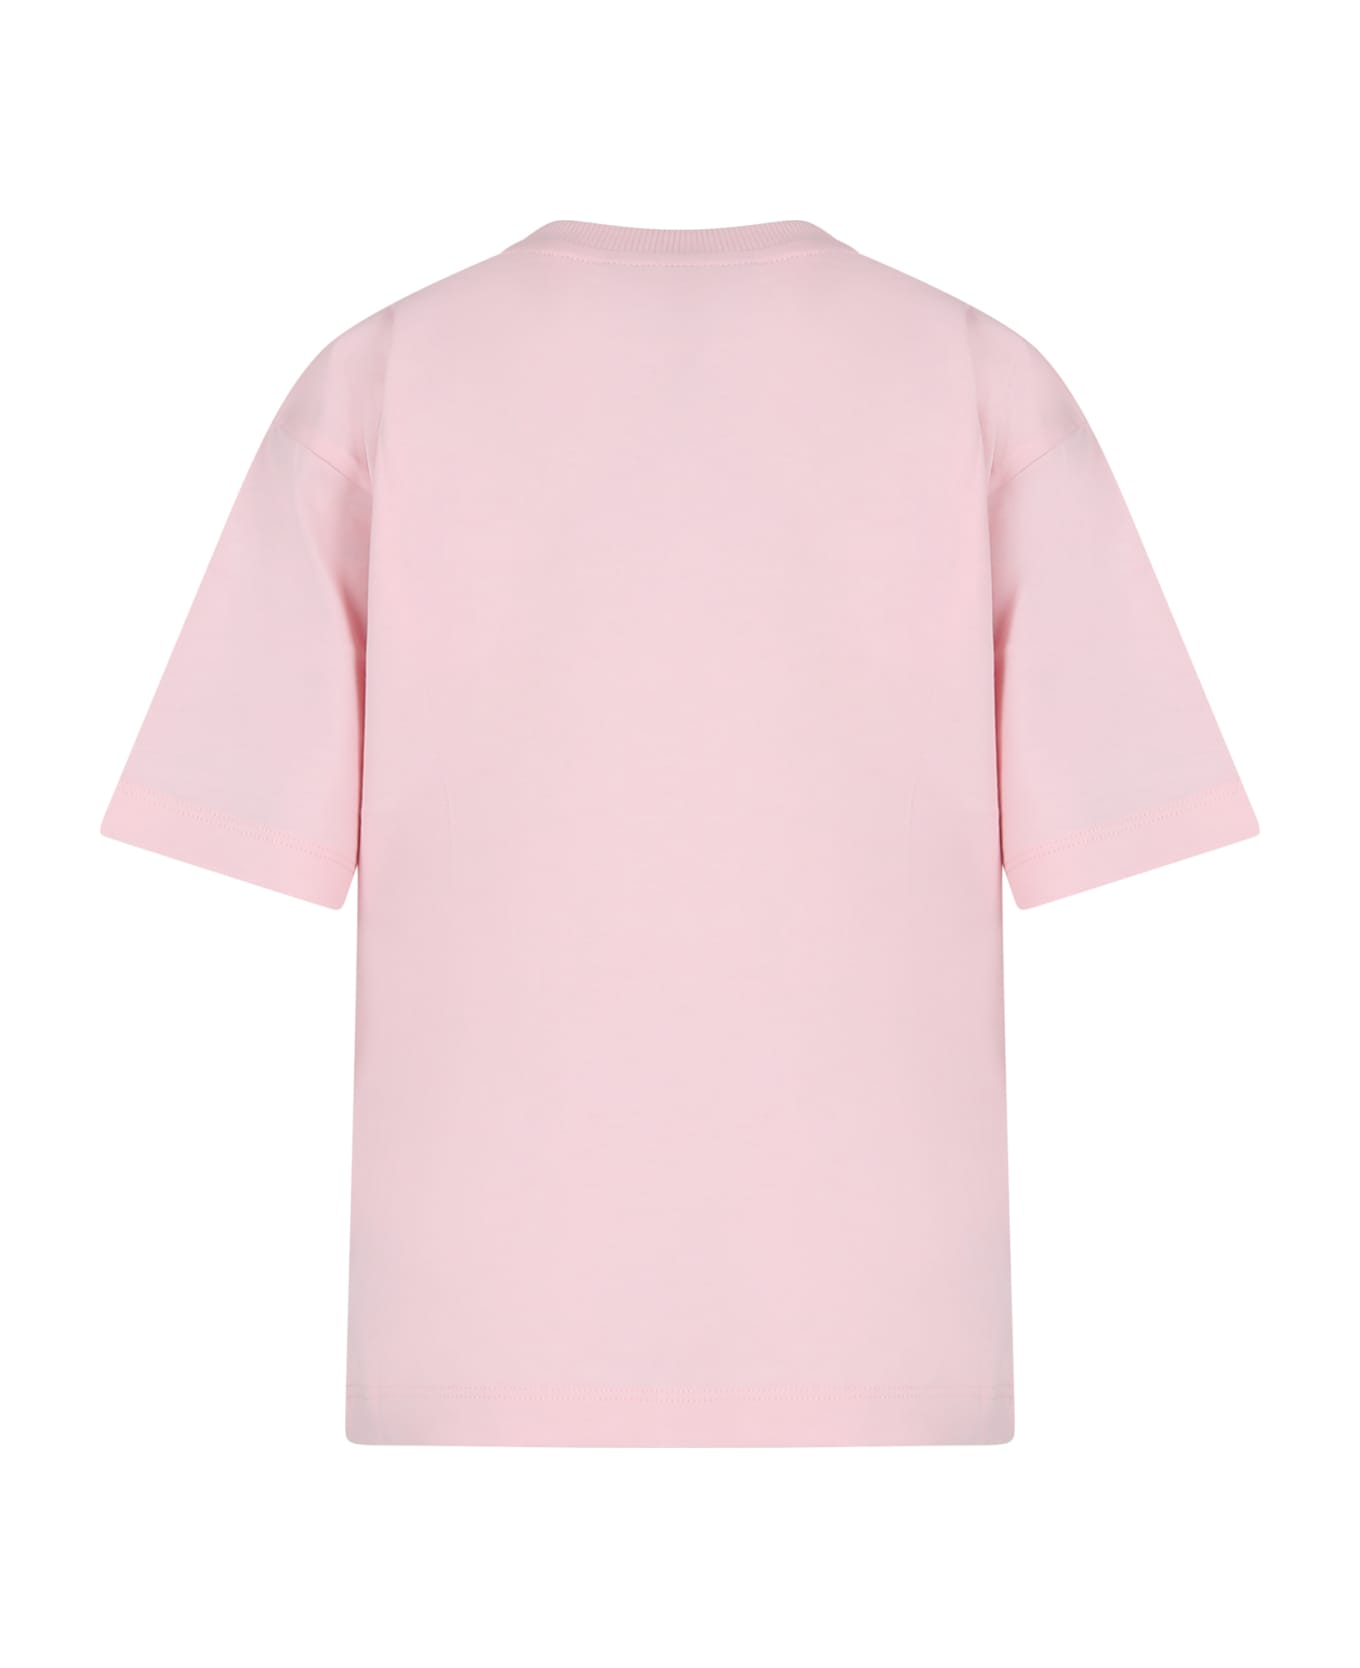 Moschino Pink T-shirt For Girl With Teddy Bear And Logo - Pink